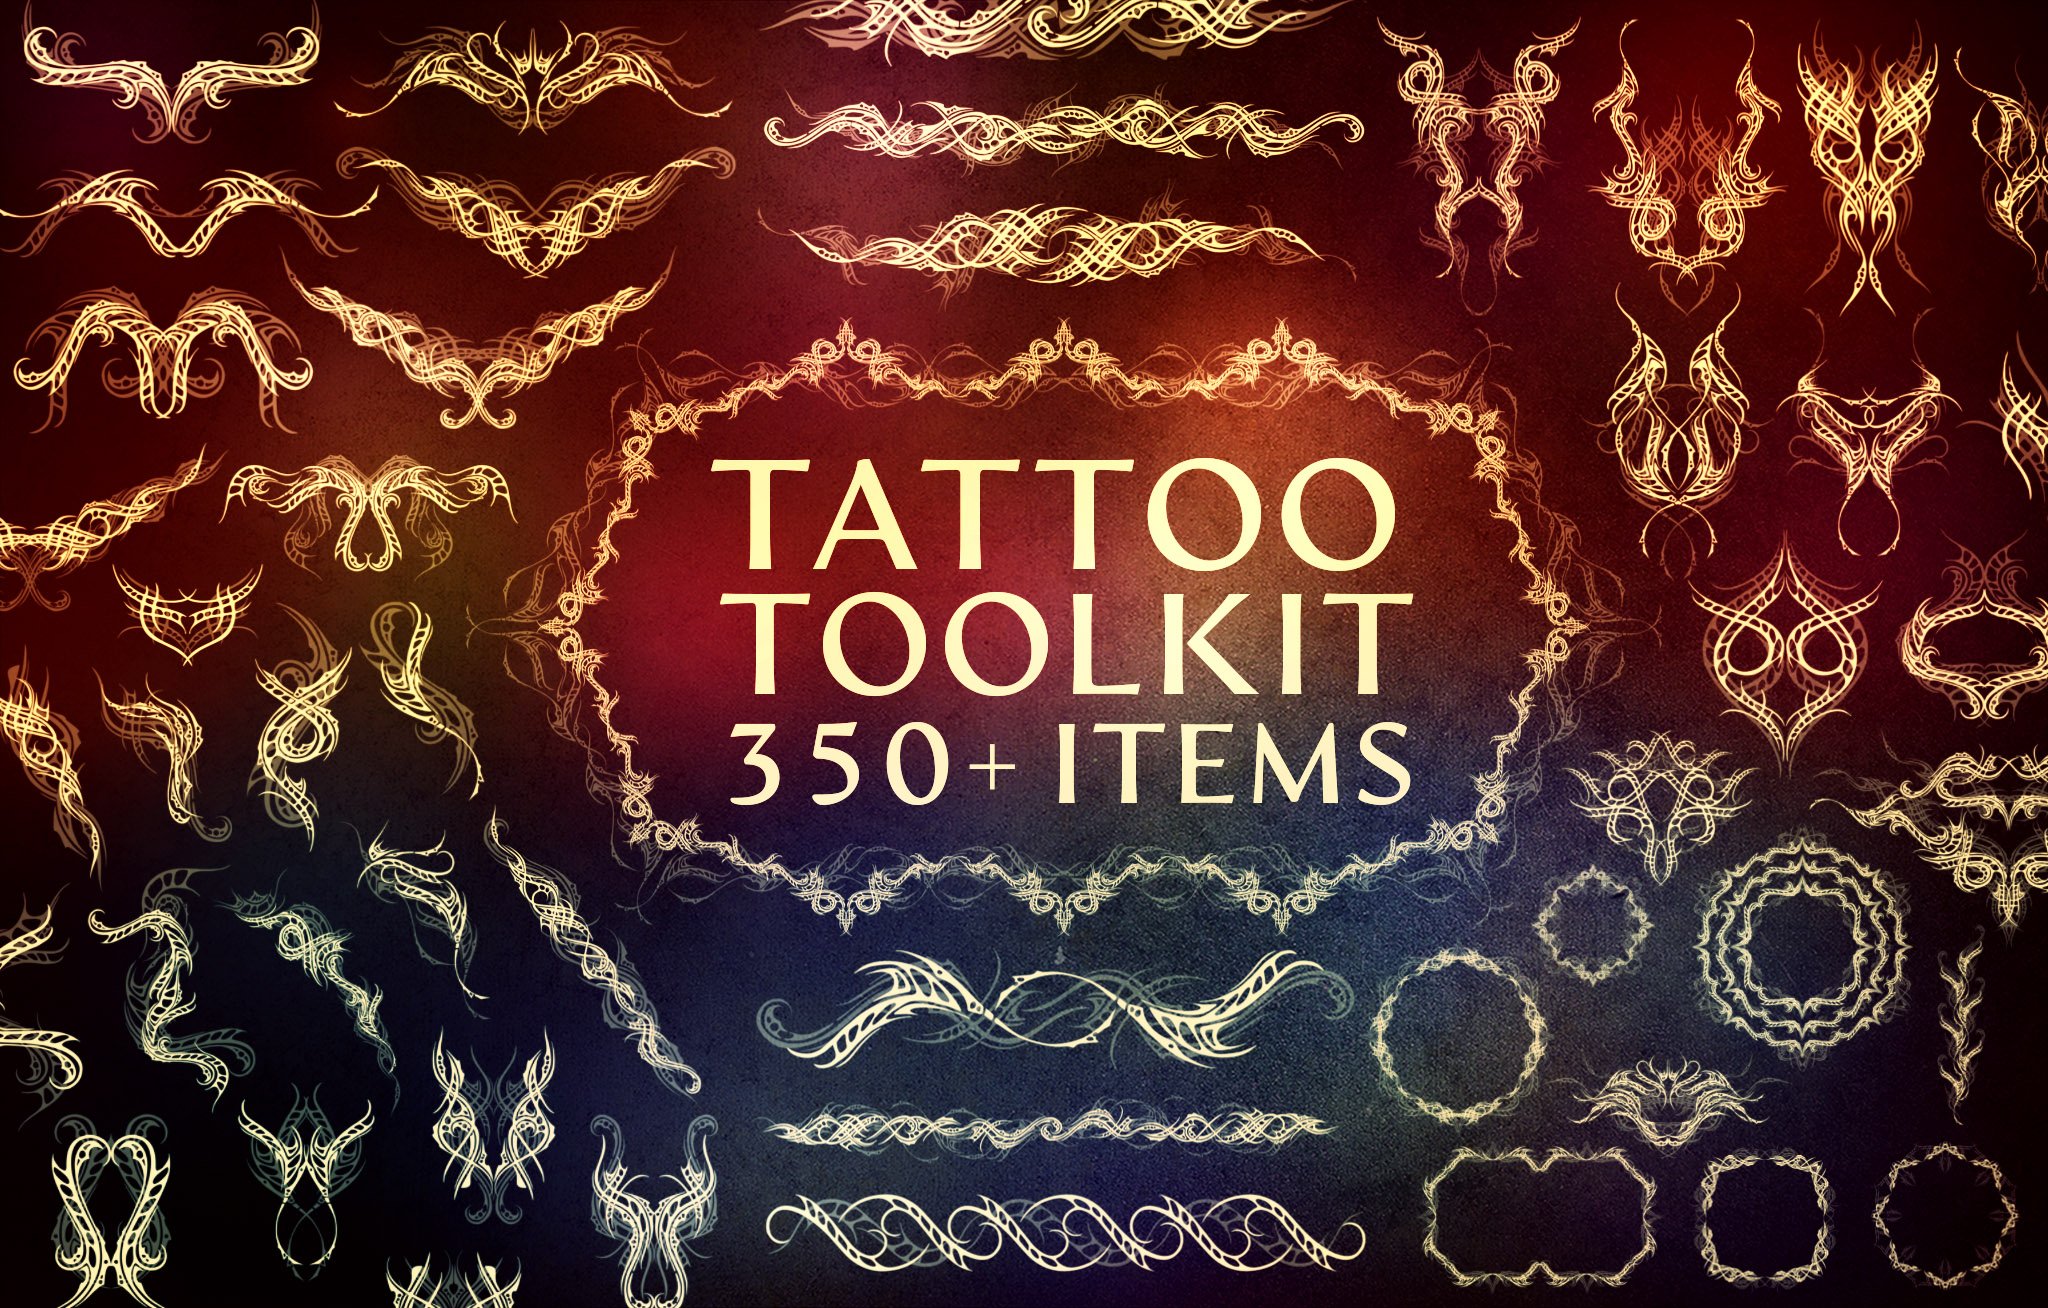 Tattoo Toolkit(Vector, PNG, Brushes)cover image.